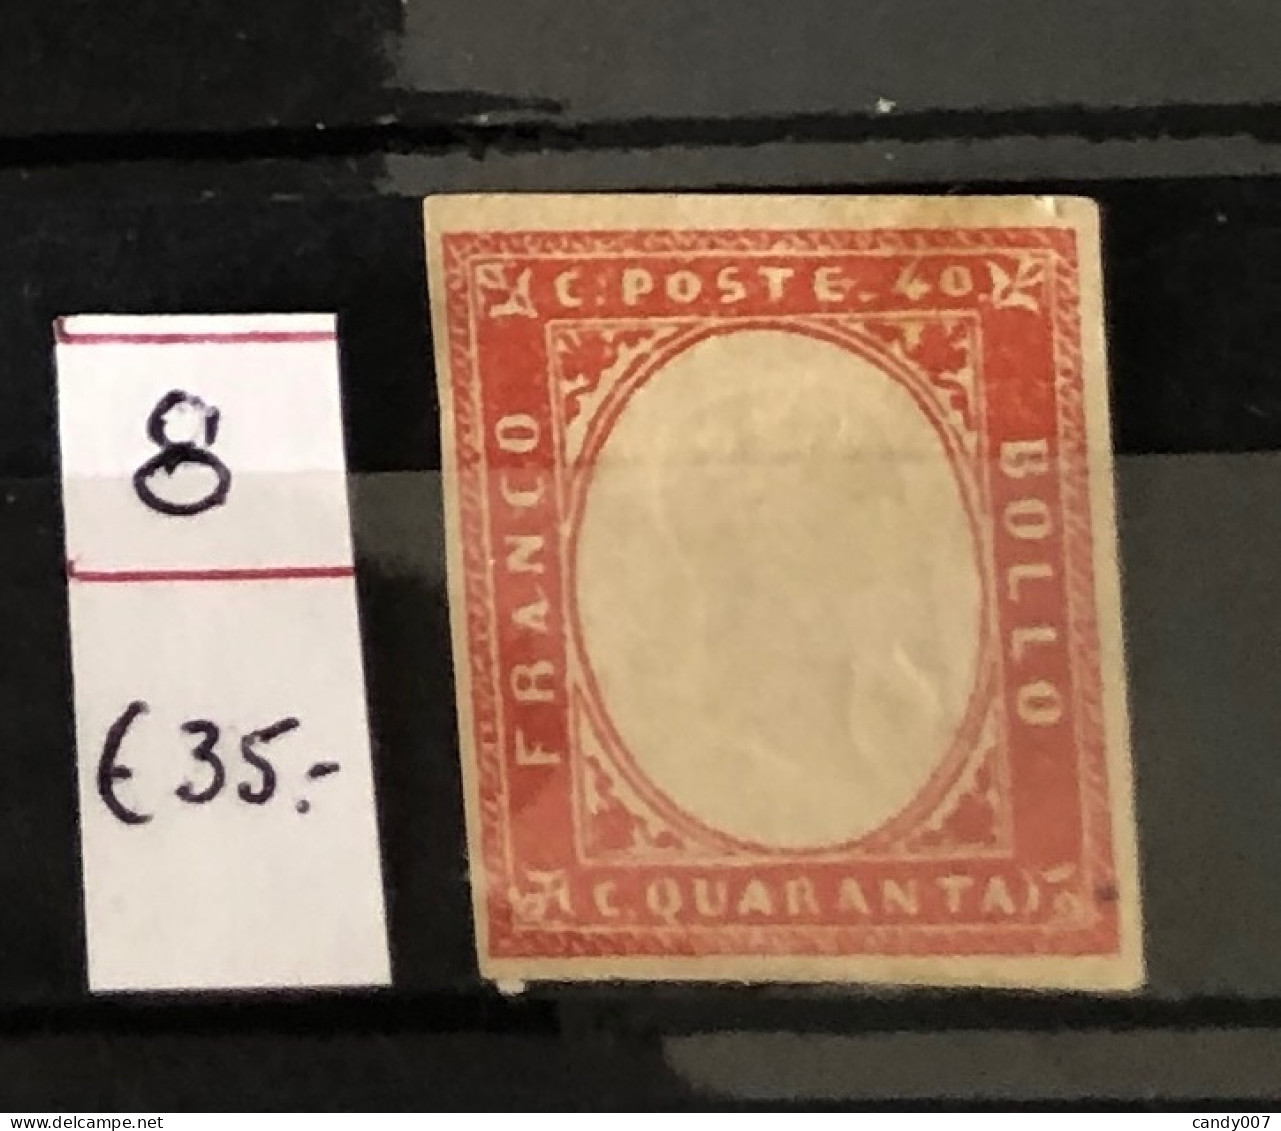 Italie Timbres N°8 De 1862 Neuf* - Mint/hinged